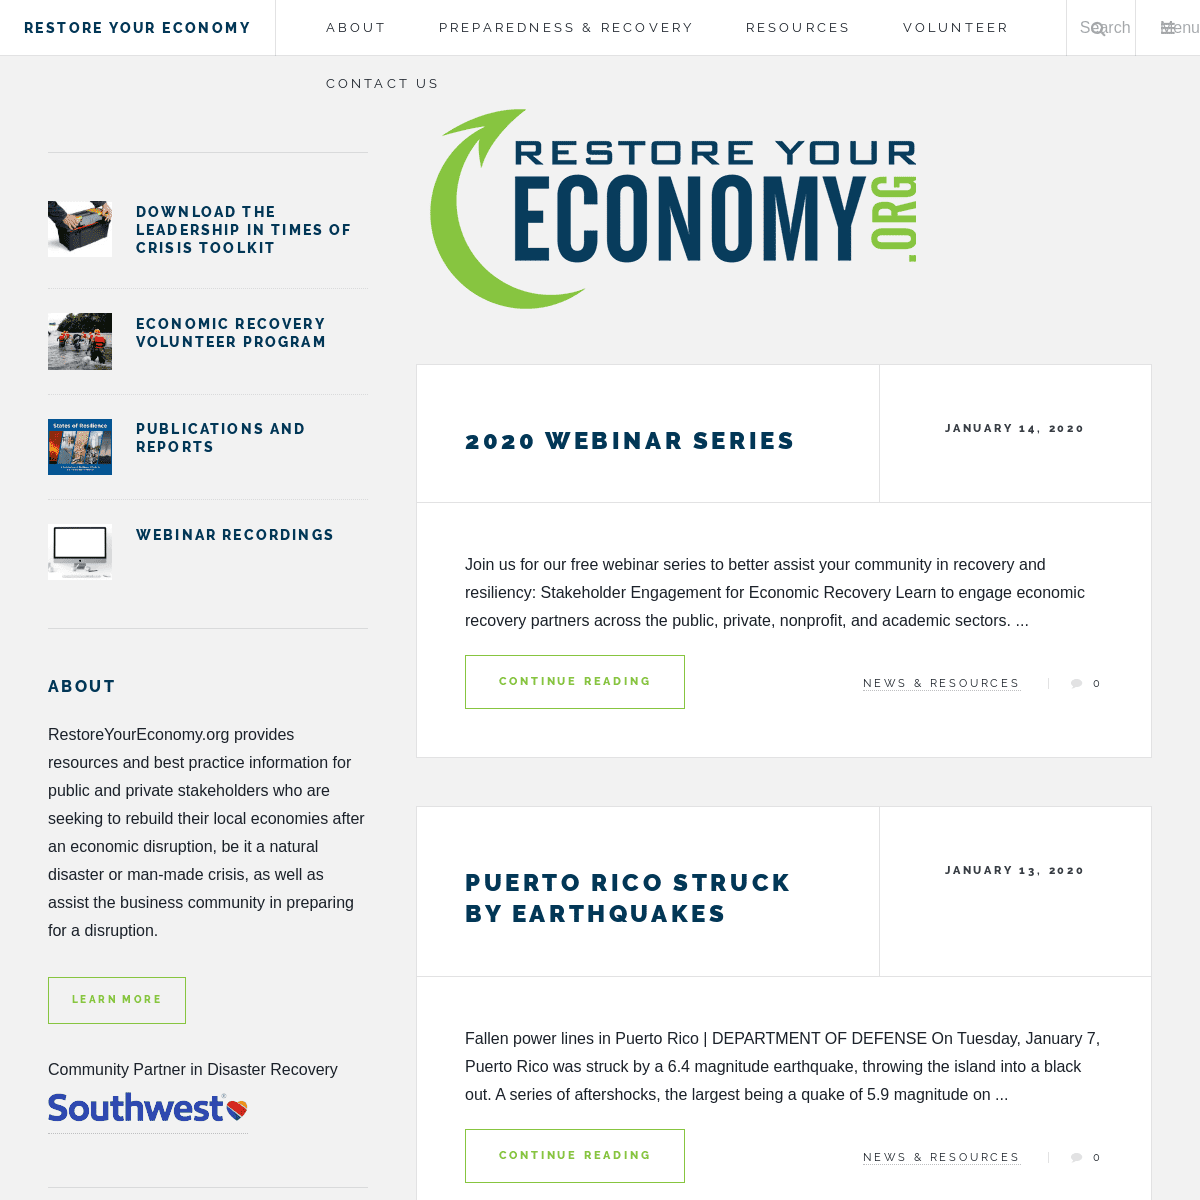 A complete backup of restoreyoureconomy.org